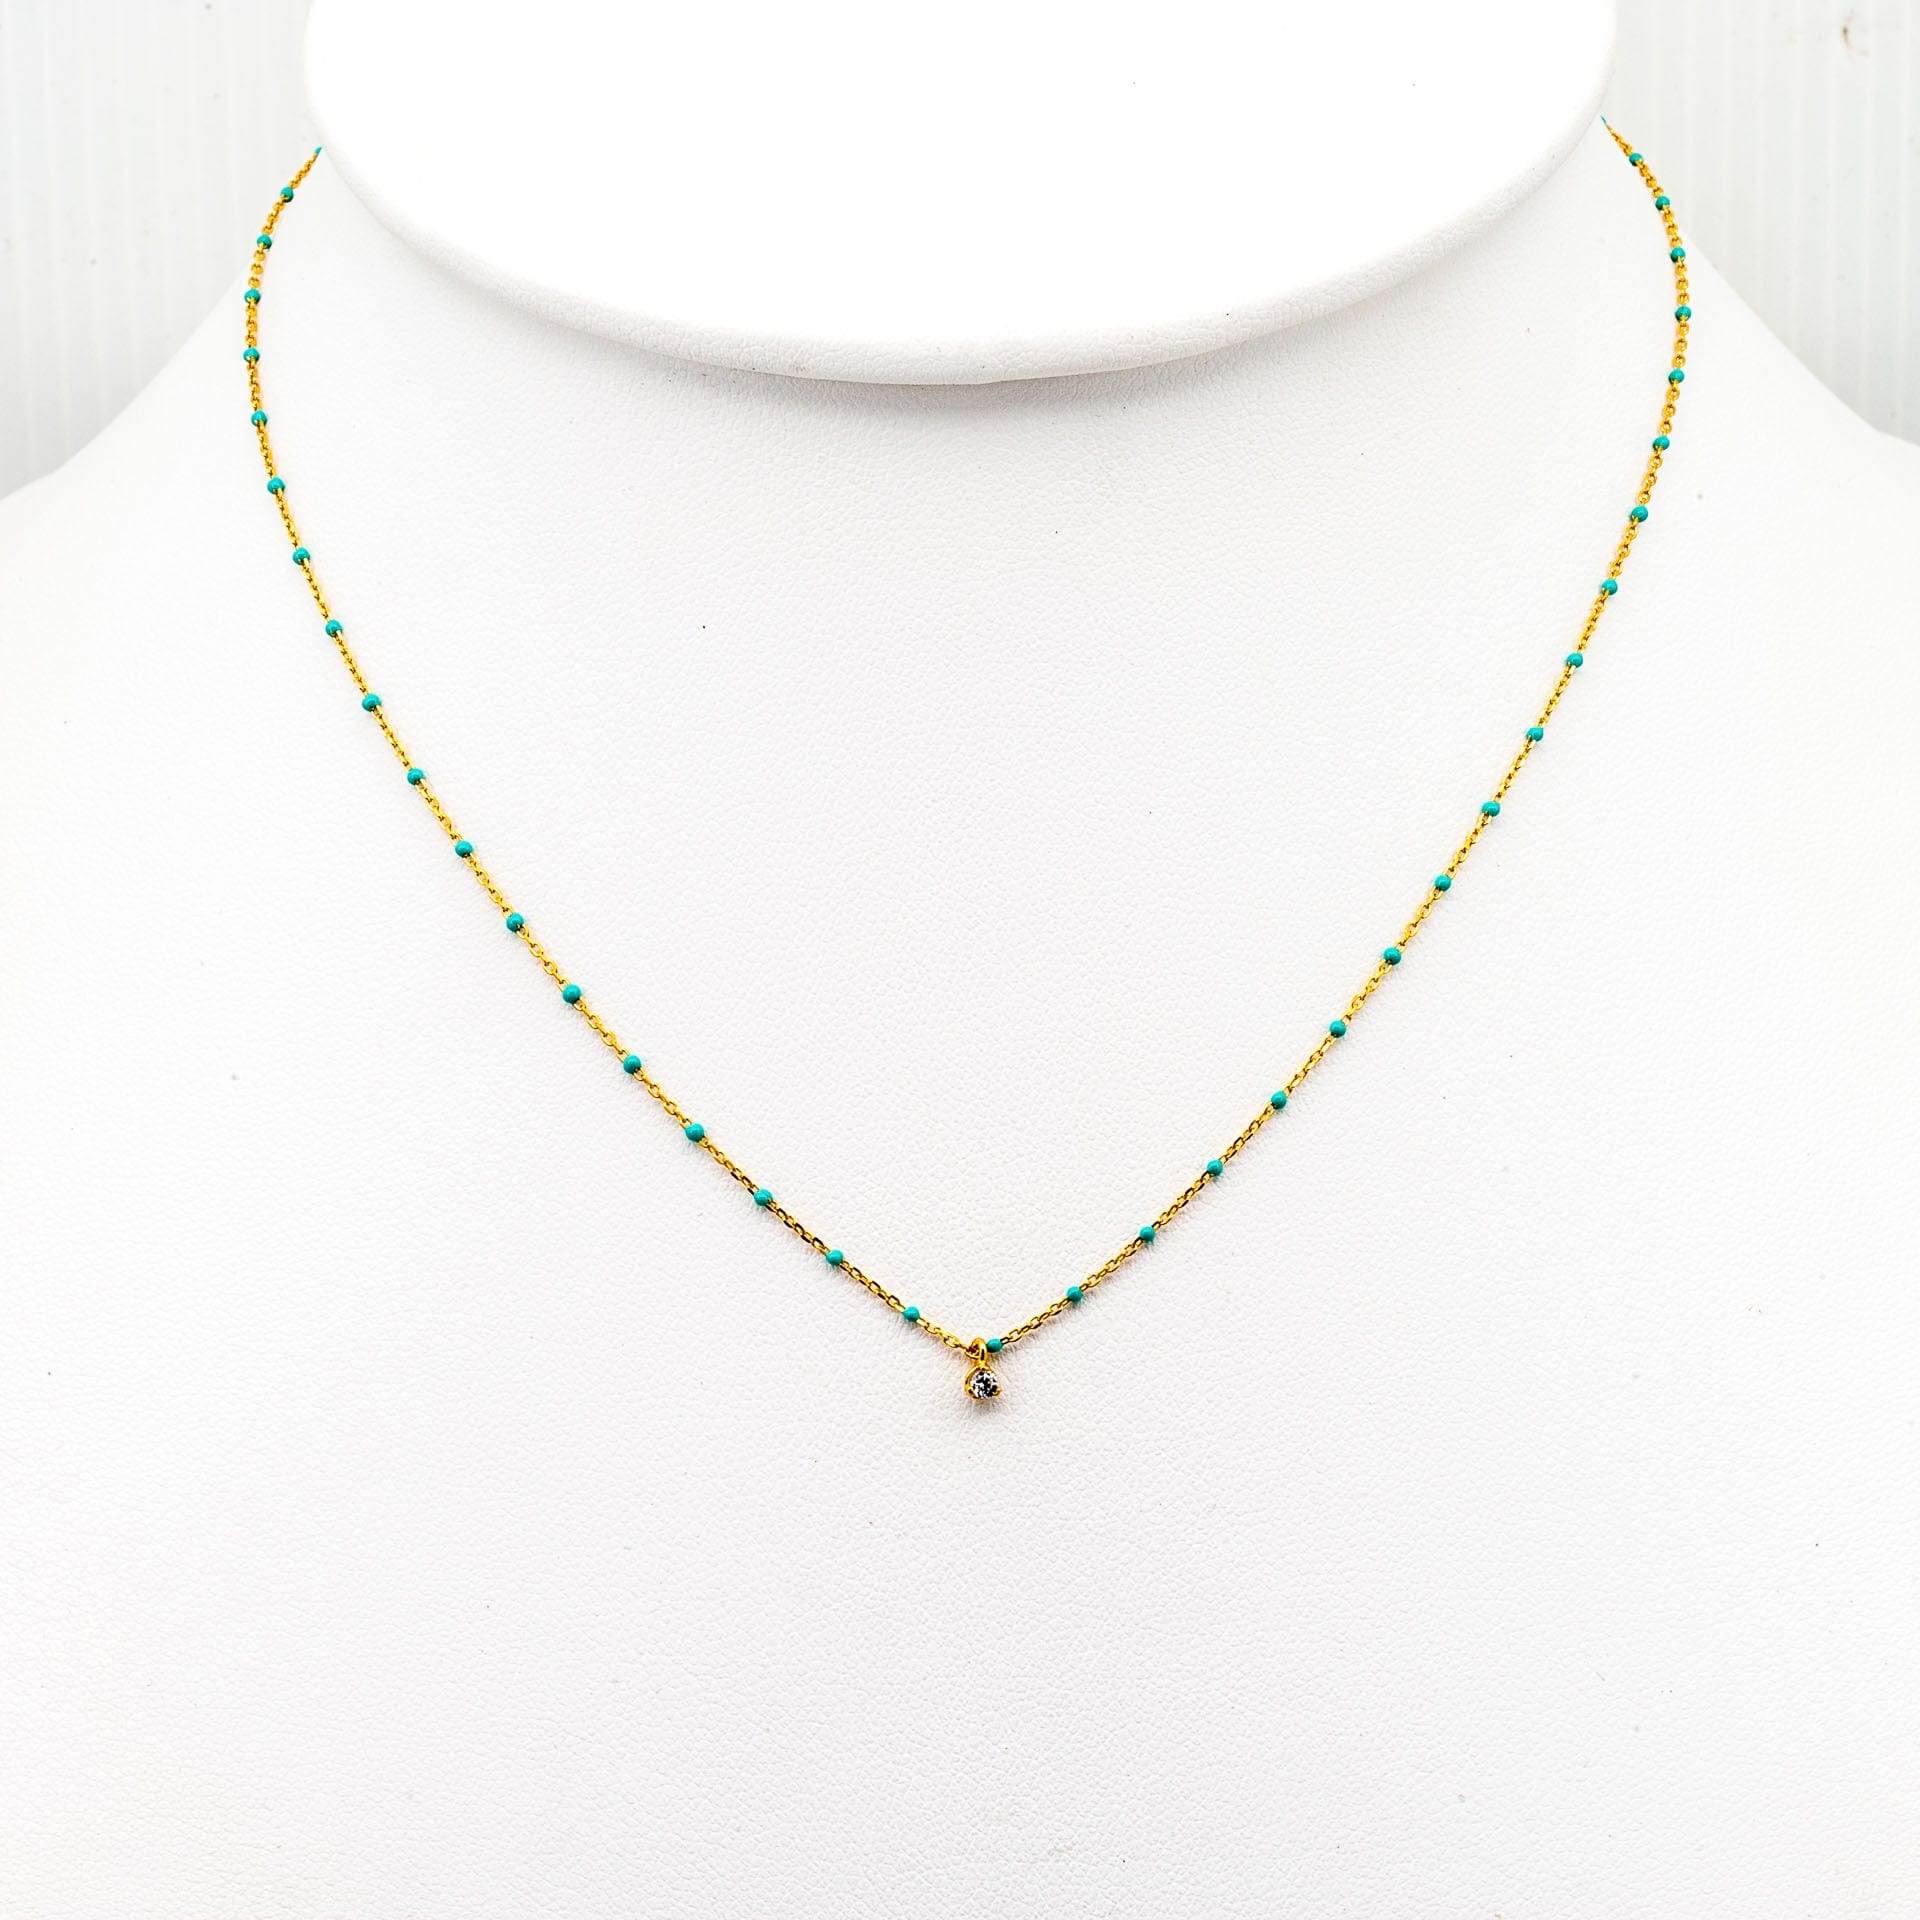 TAI JEWELRY Necklace Gold Vermeil Enamel Necklace With Multiple Cz/Turquoise Stones